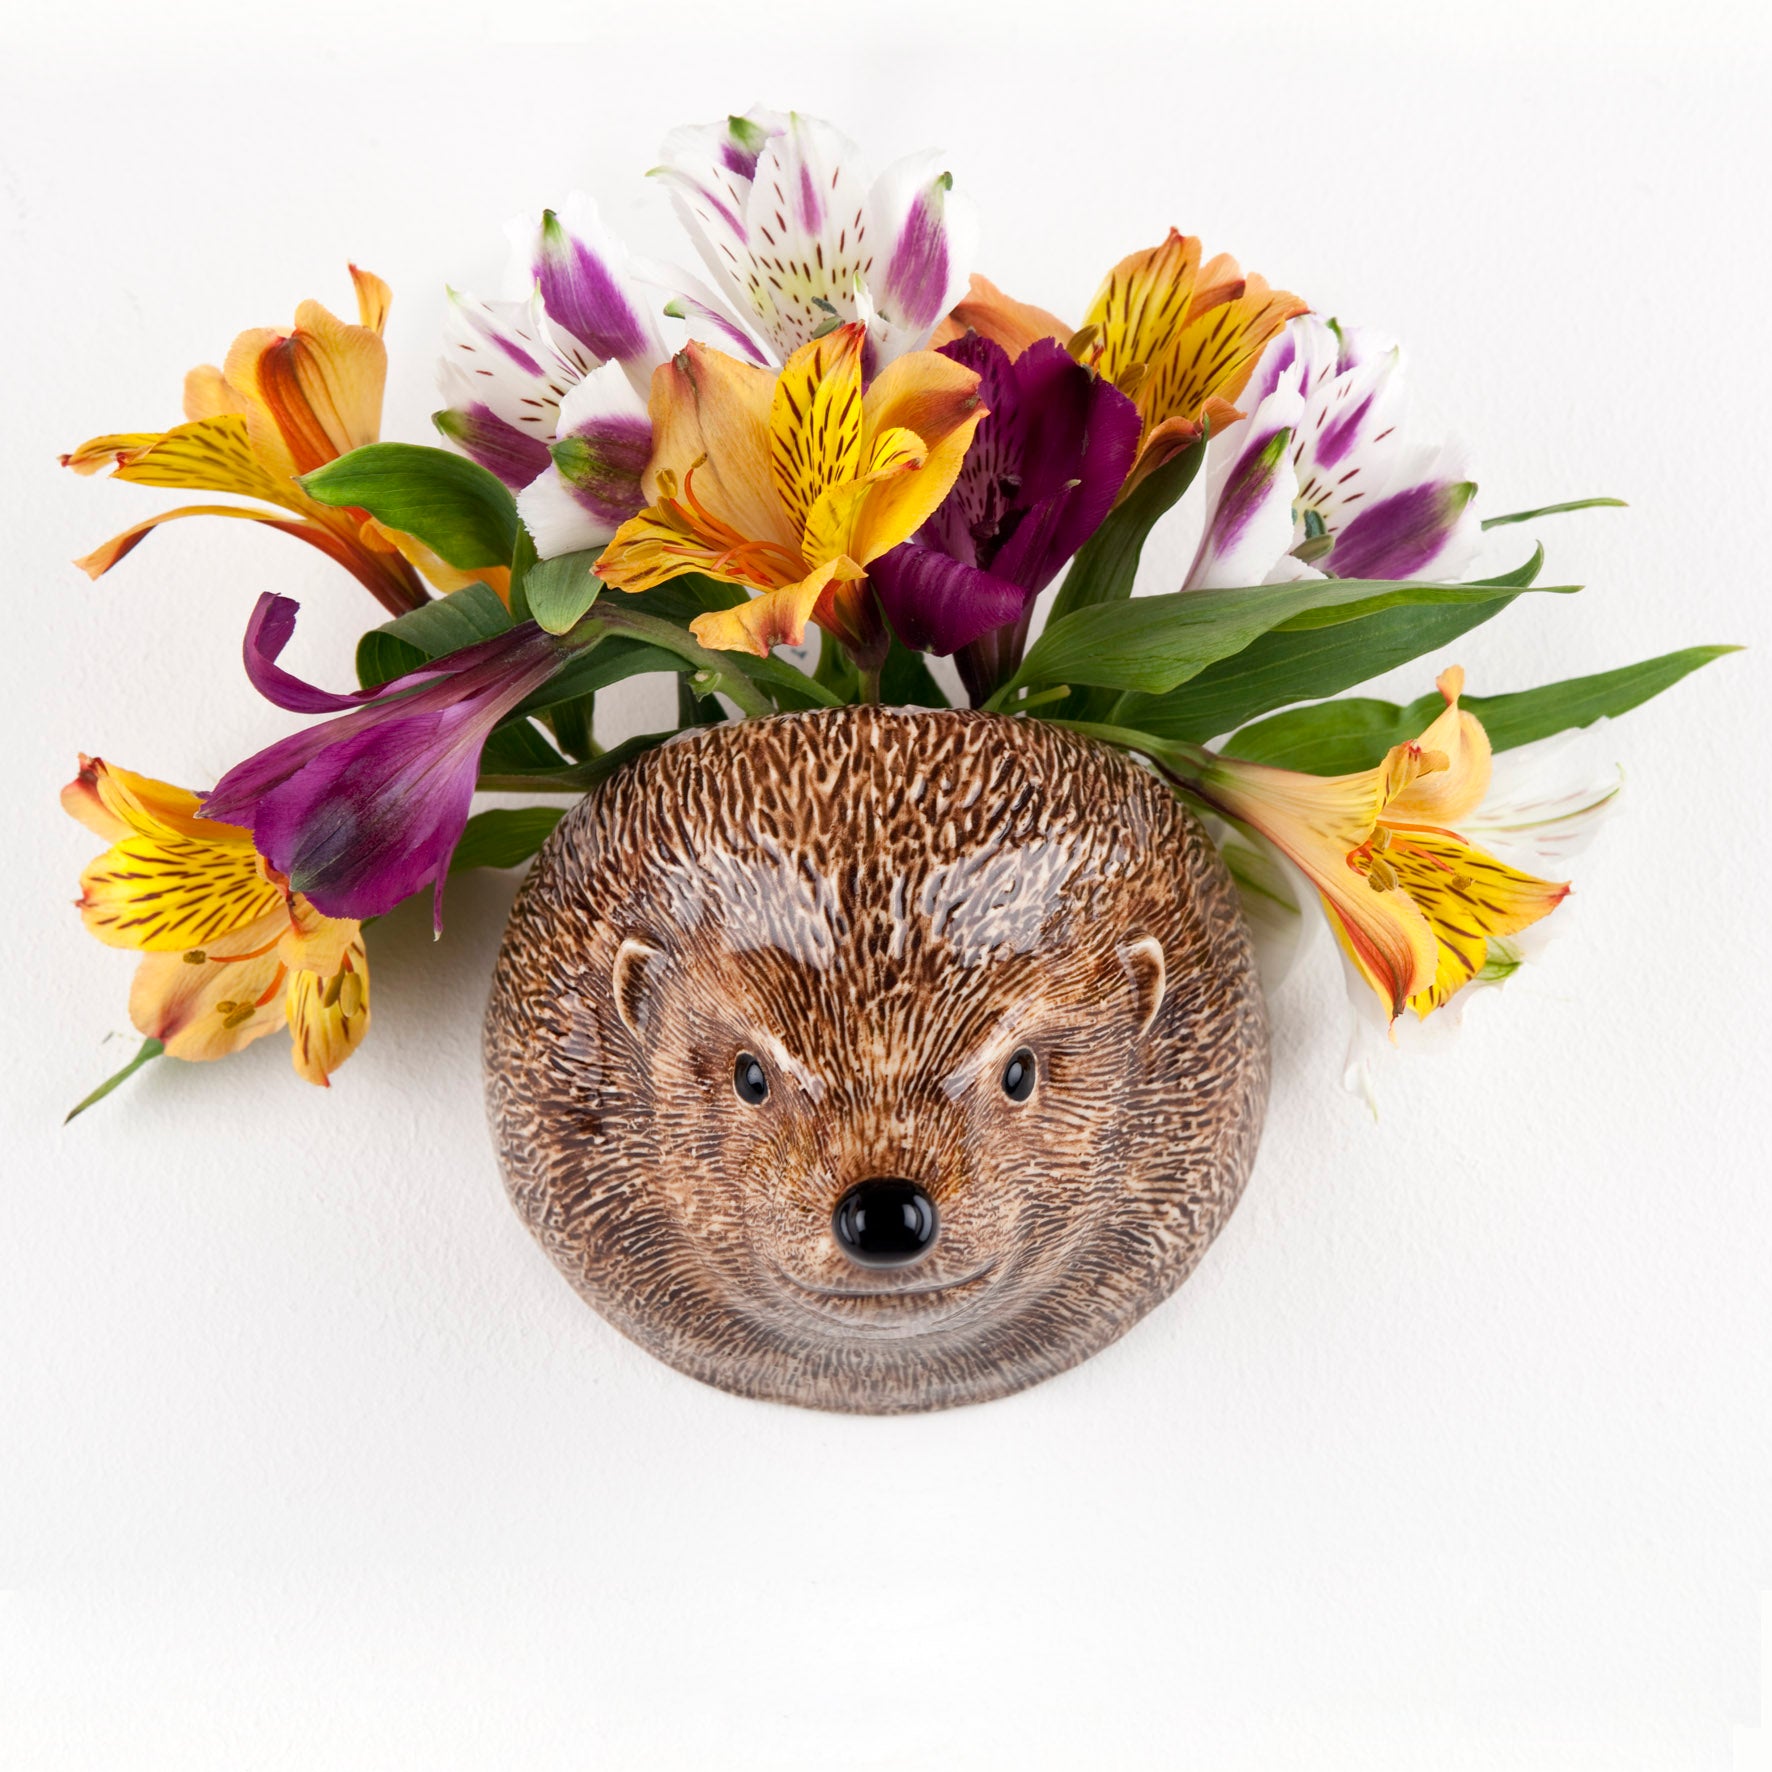 Quirky wall vase depicting hedgehog face.